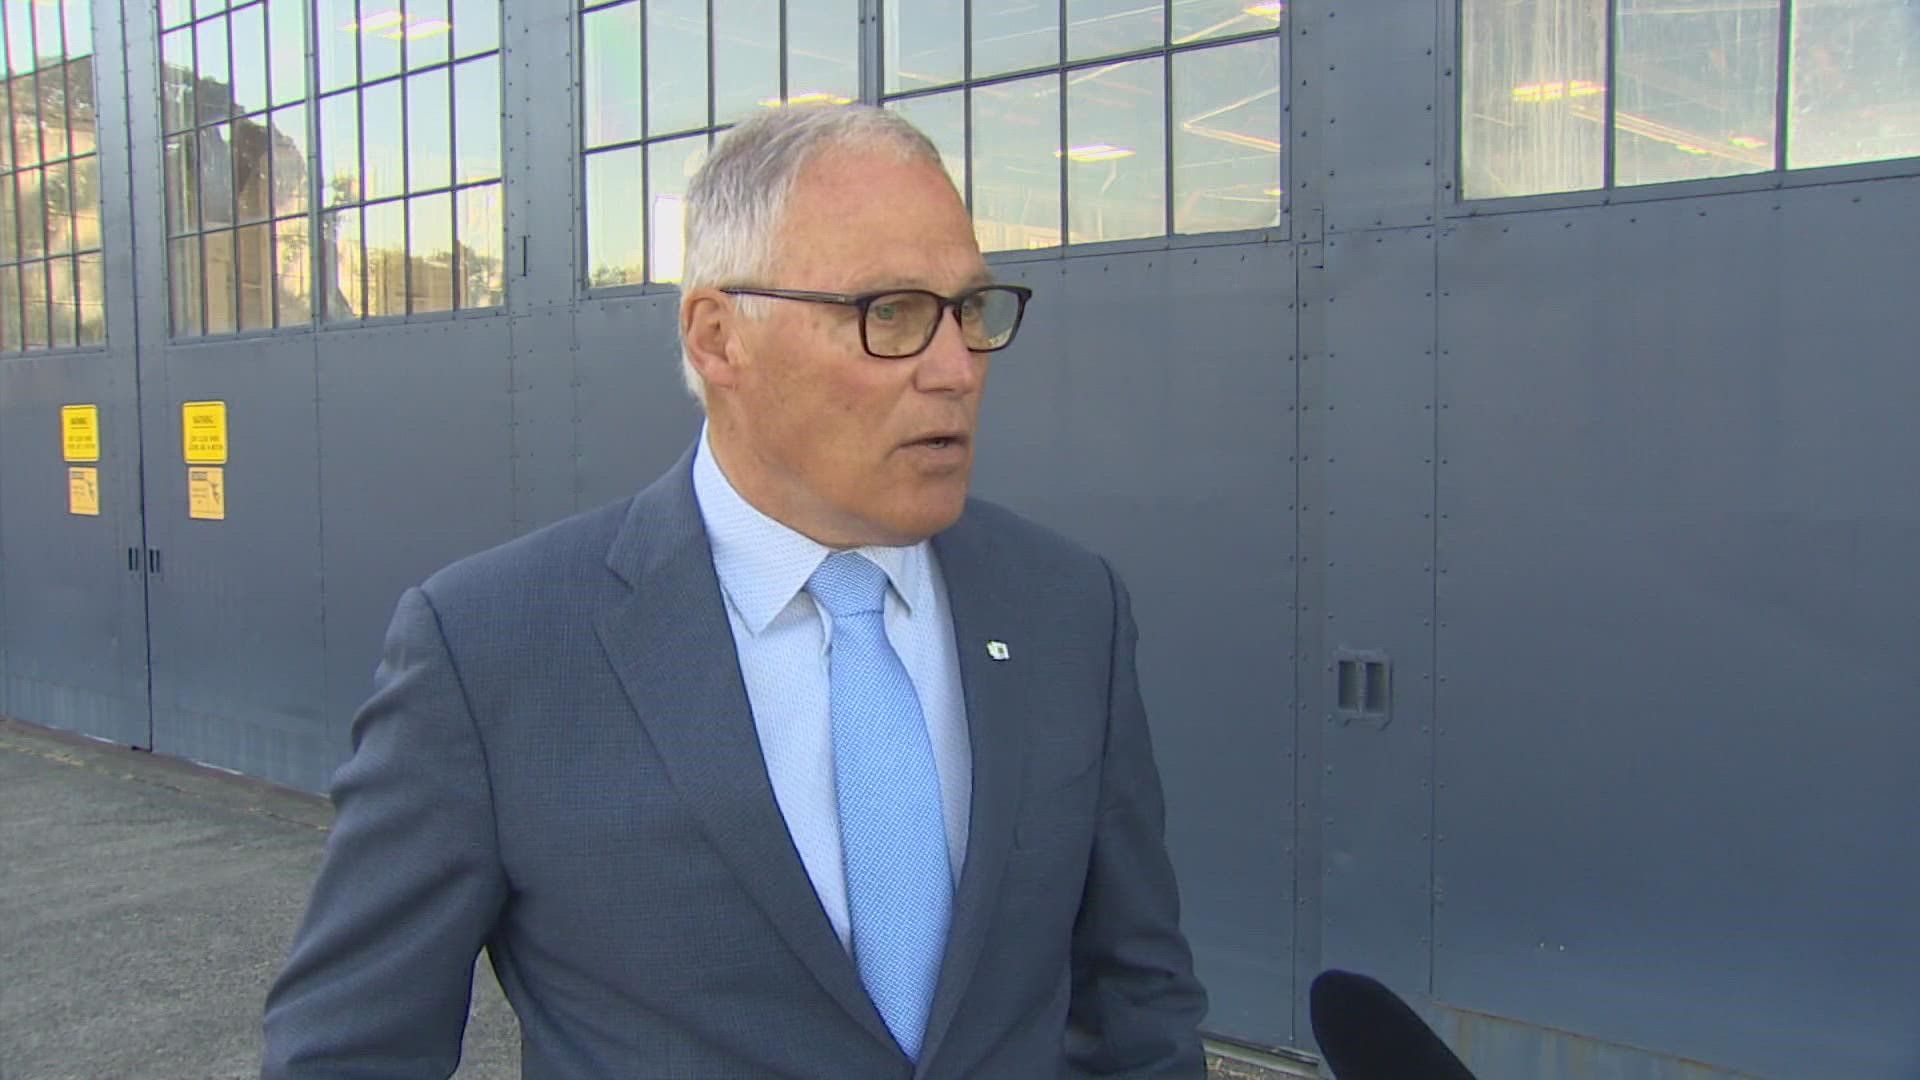 Gov. Jay Inslee is warning that abortion rights aren't iron clad in Washington, despite claims from Republican lawmakers that they won't pursue a ban.